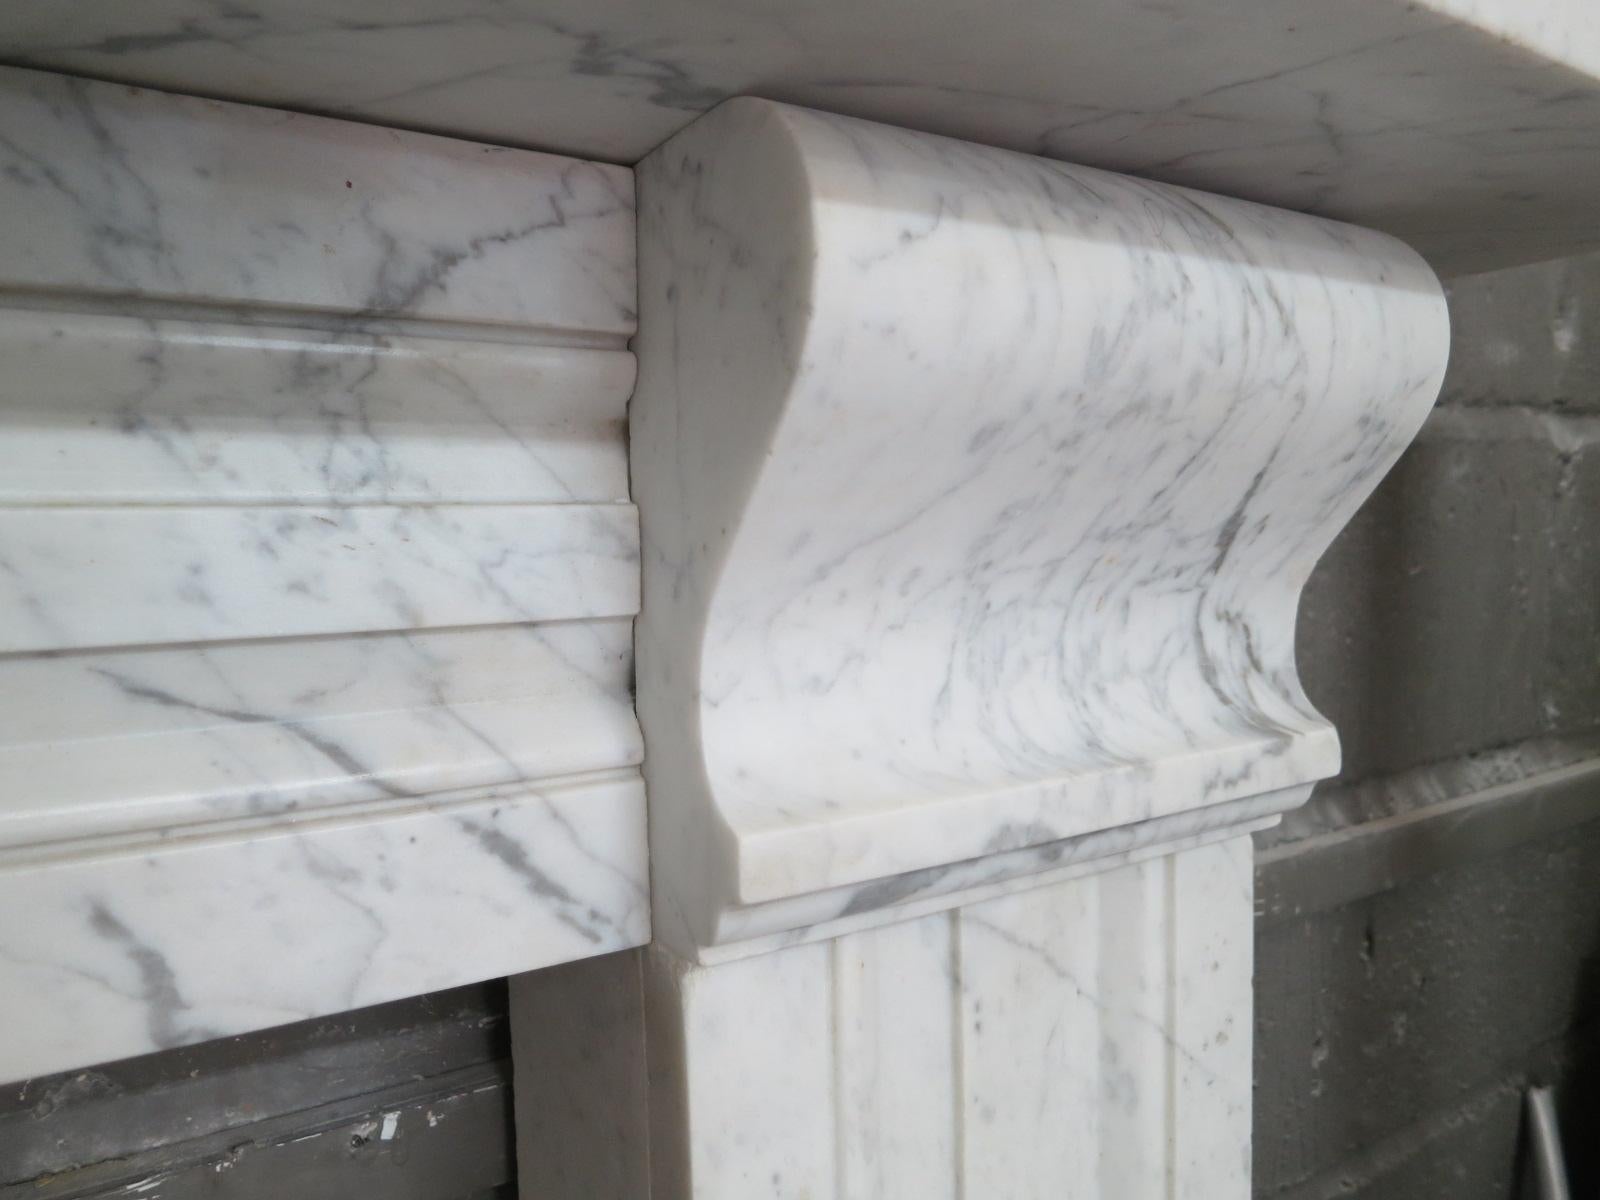 A late Regency period English fireplace of architectural form in pencil vein Italian Carrara marble, with matching moulded jamb and frieze panels. The scrolled corbels with conforming mouldings, supporting a substantial rectangular mantel. The whole